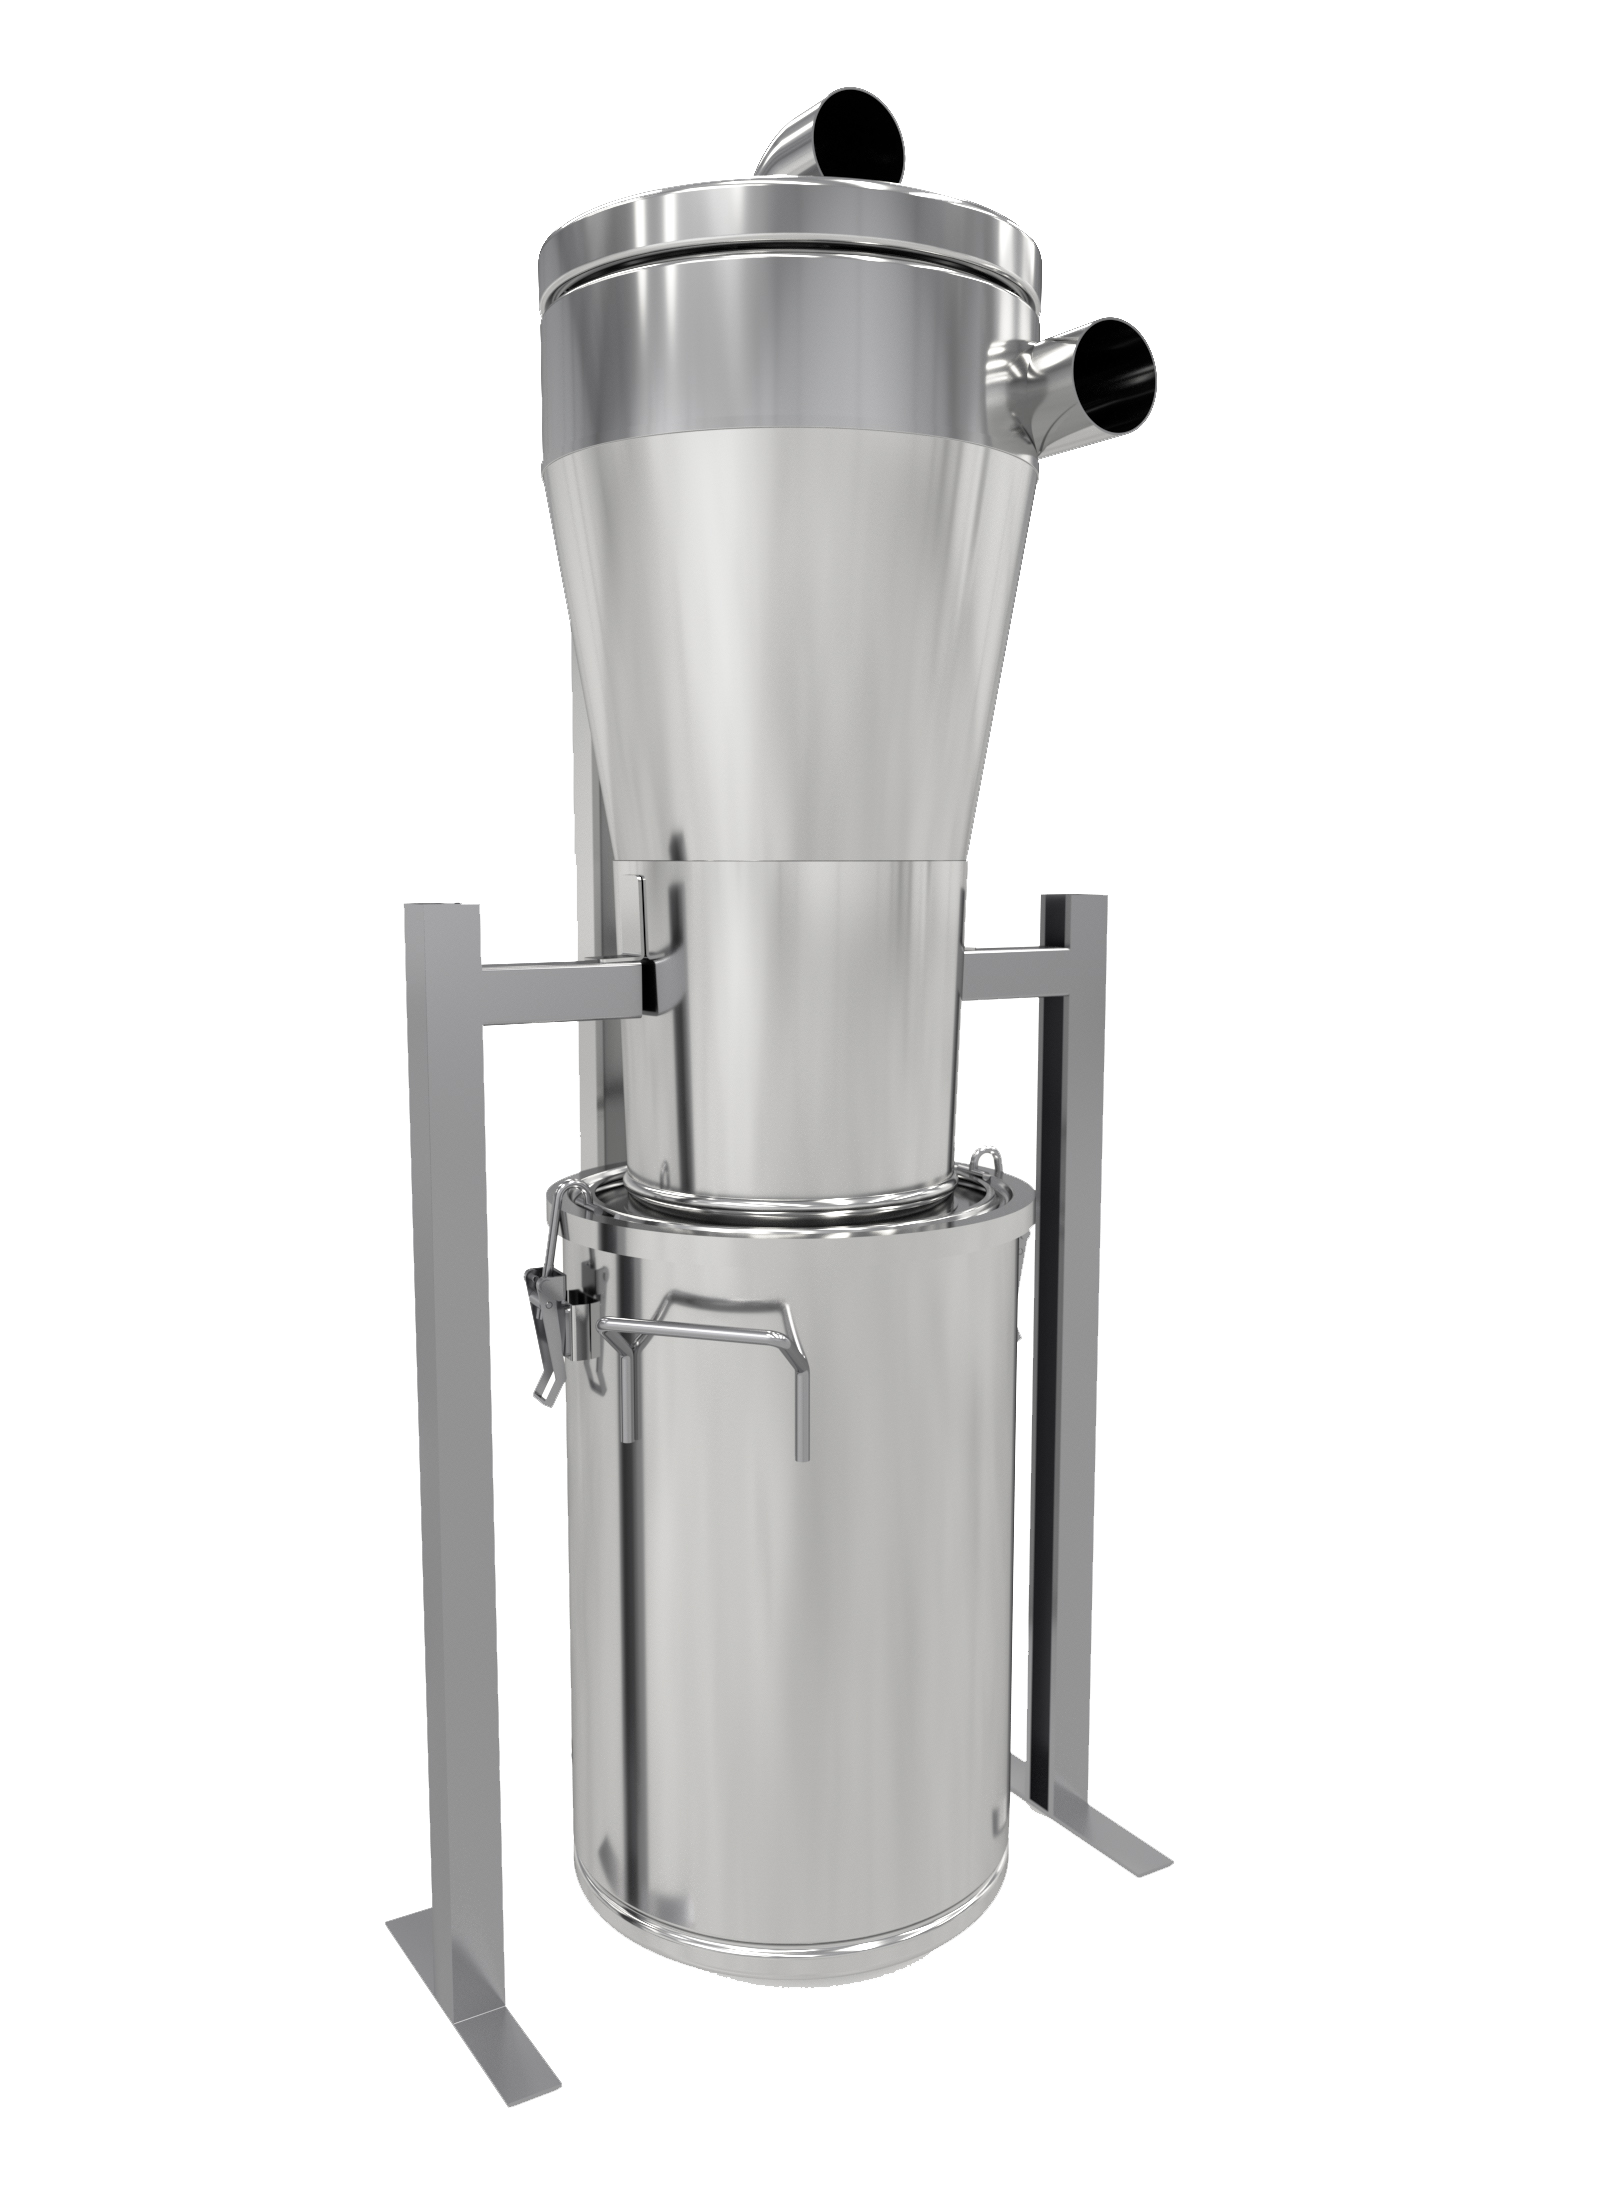 The Good for Food pre-separator allows food producers to reuse materials that have been separated out.